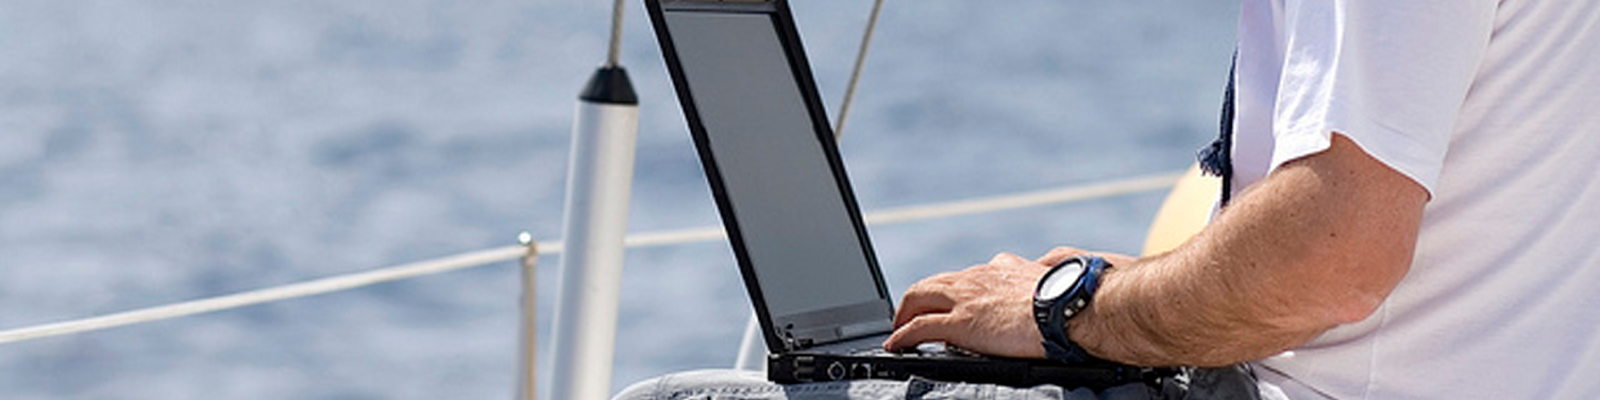 Wi-Fi Update: How Boaters and Marinas Can Create a Better Wi-Fi Experience